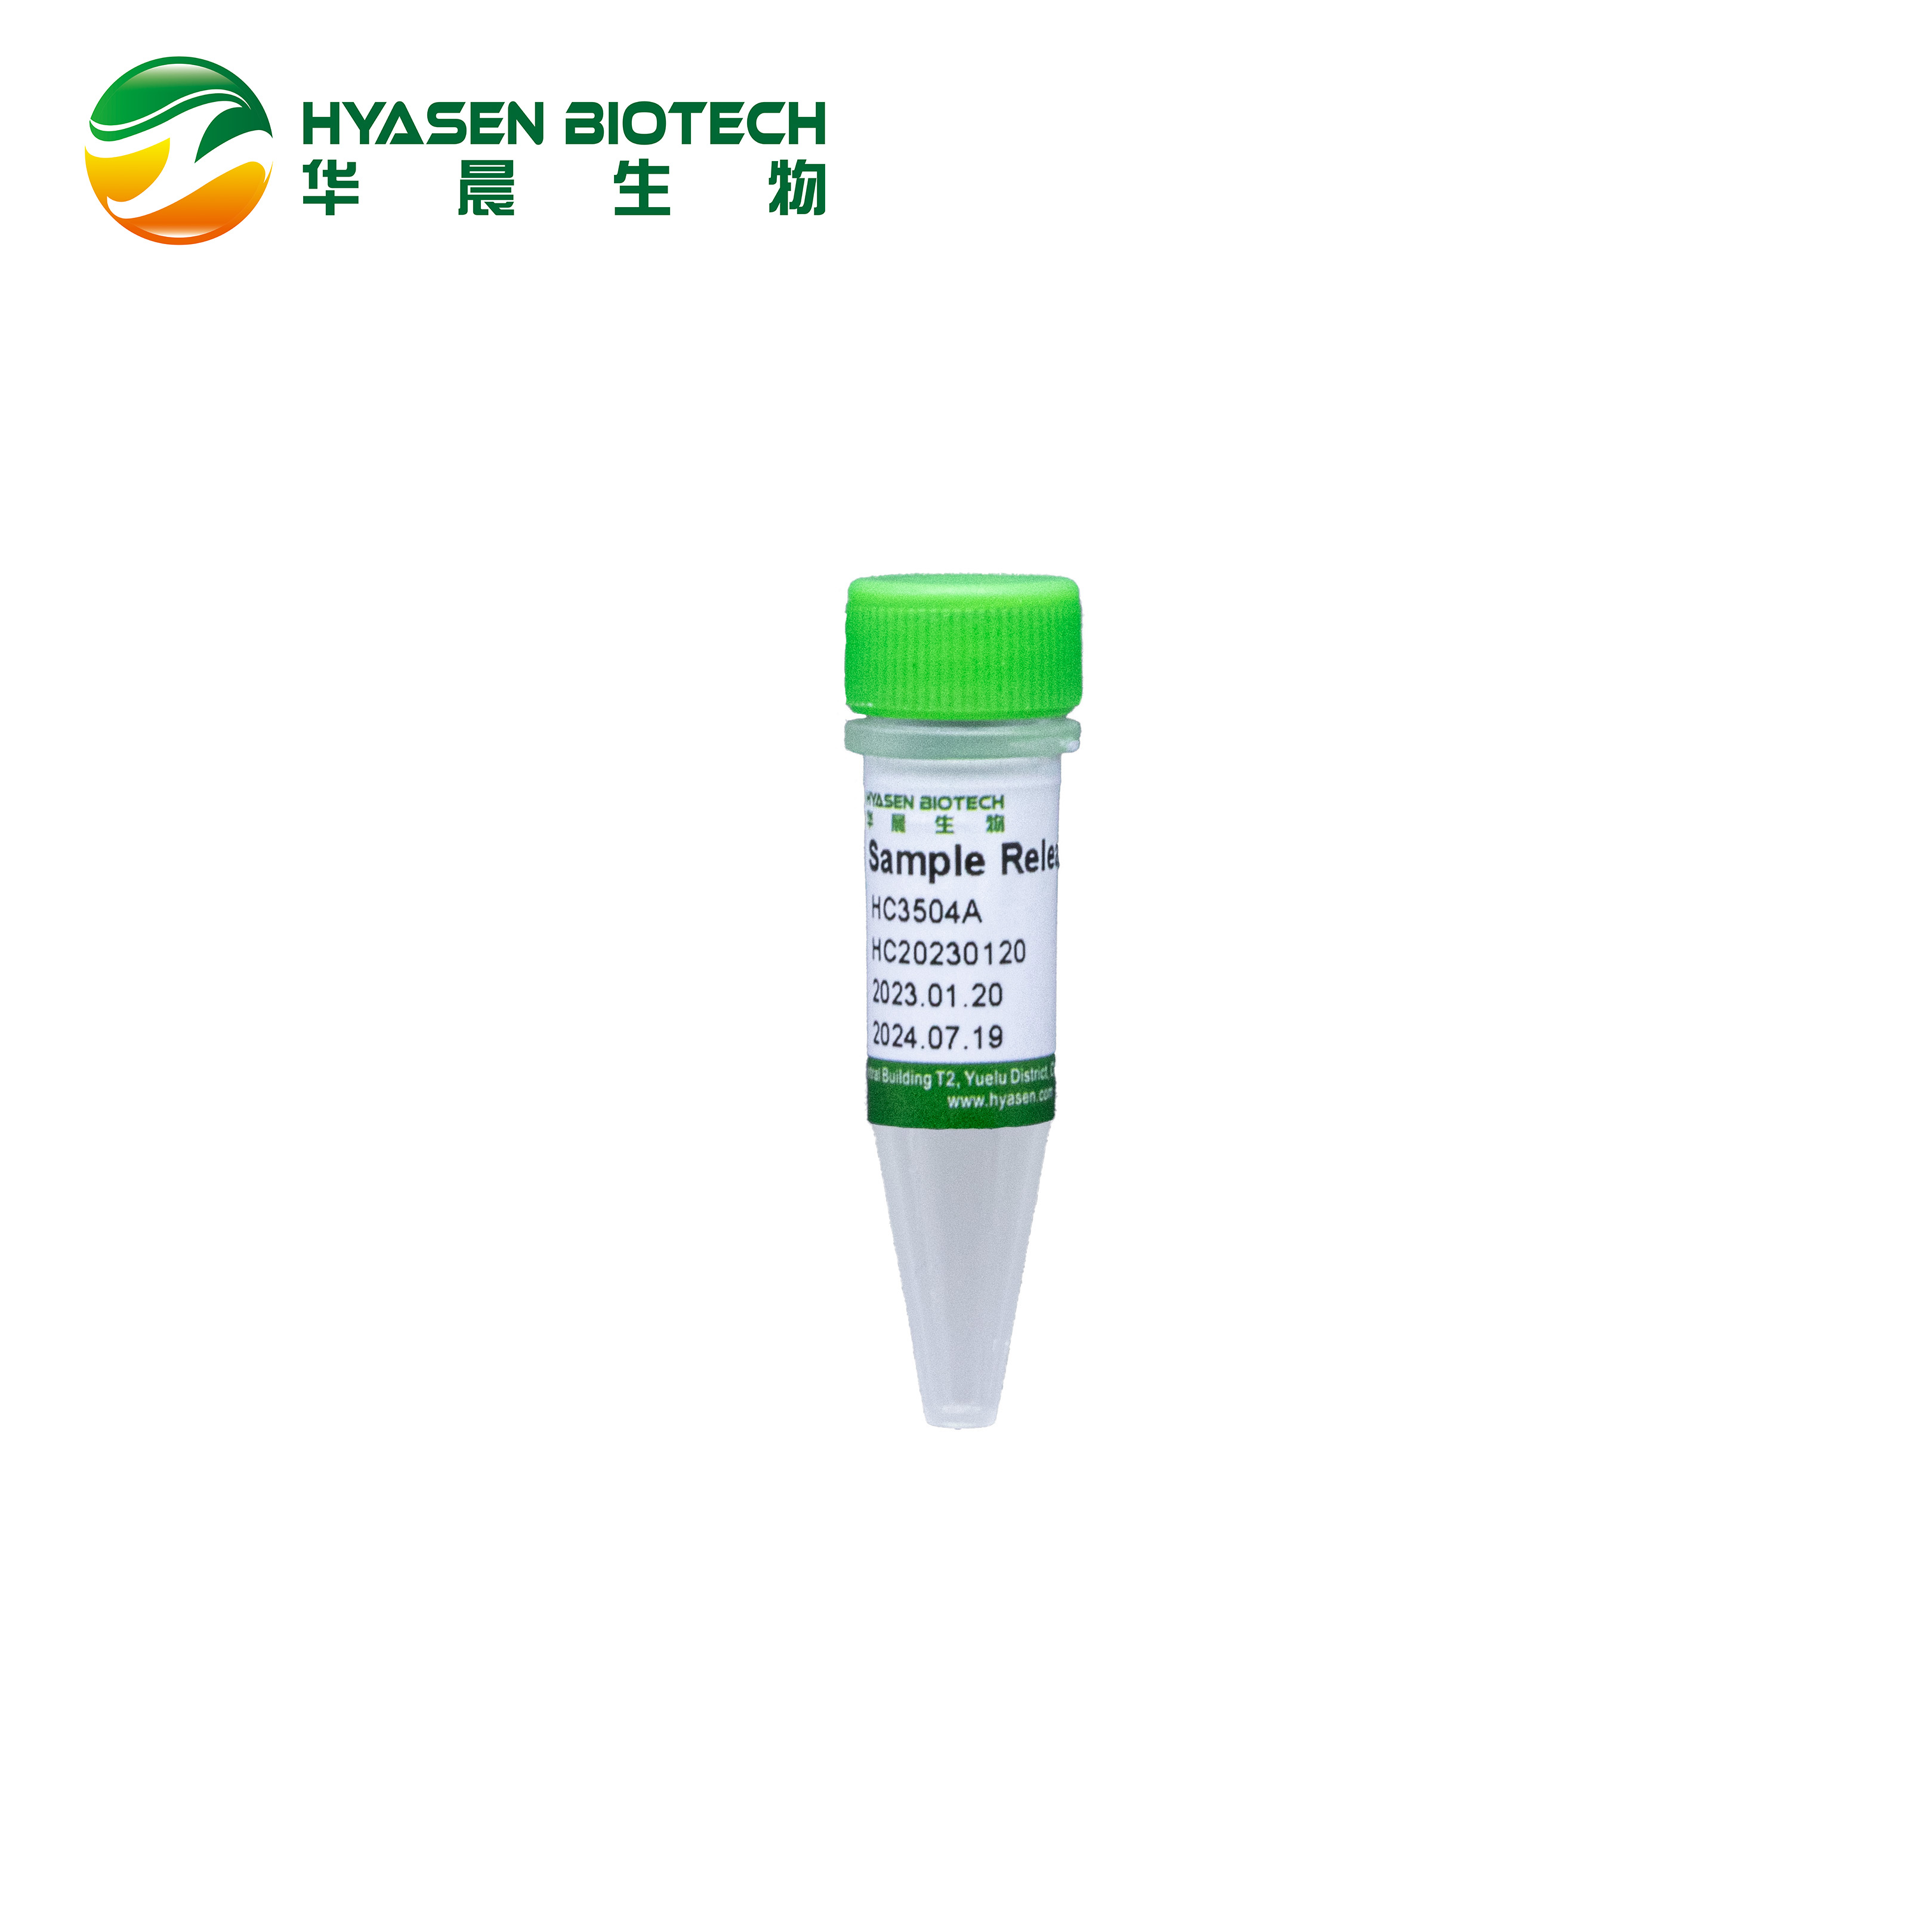 Sample Release Reagent HC3504A Featured Image